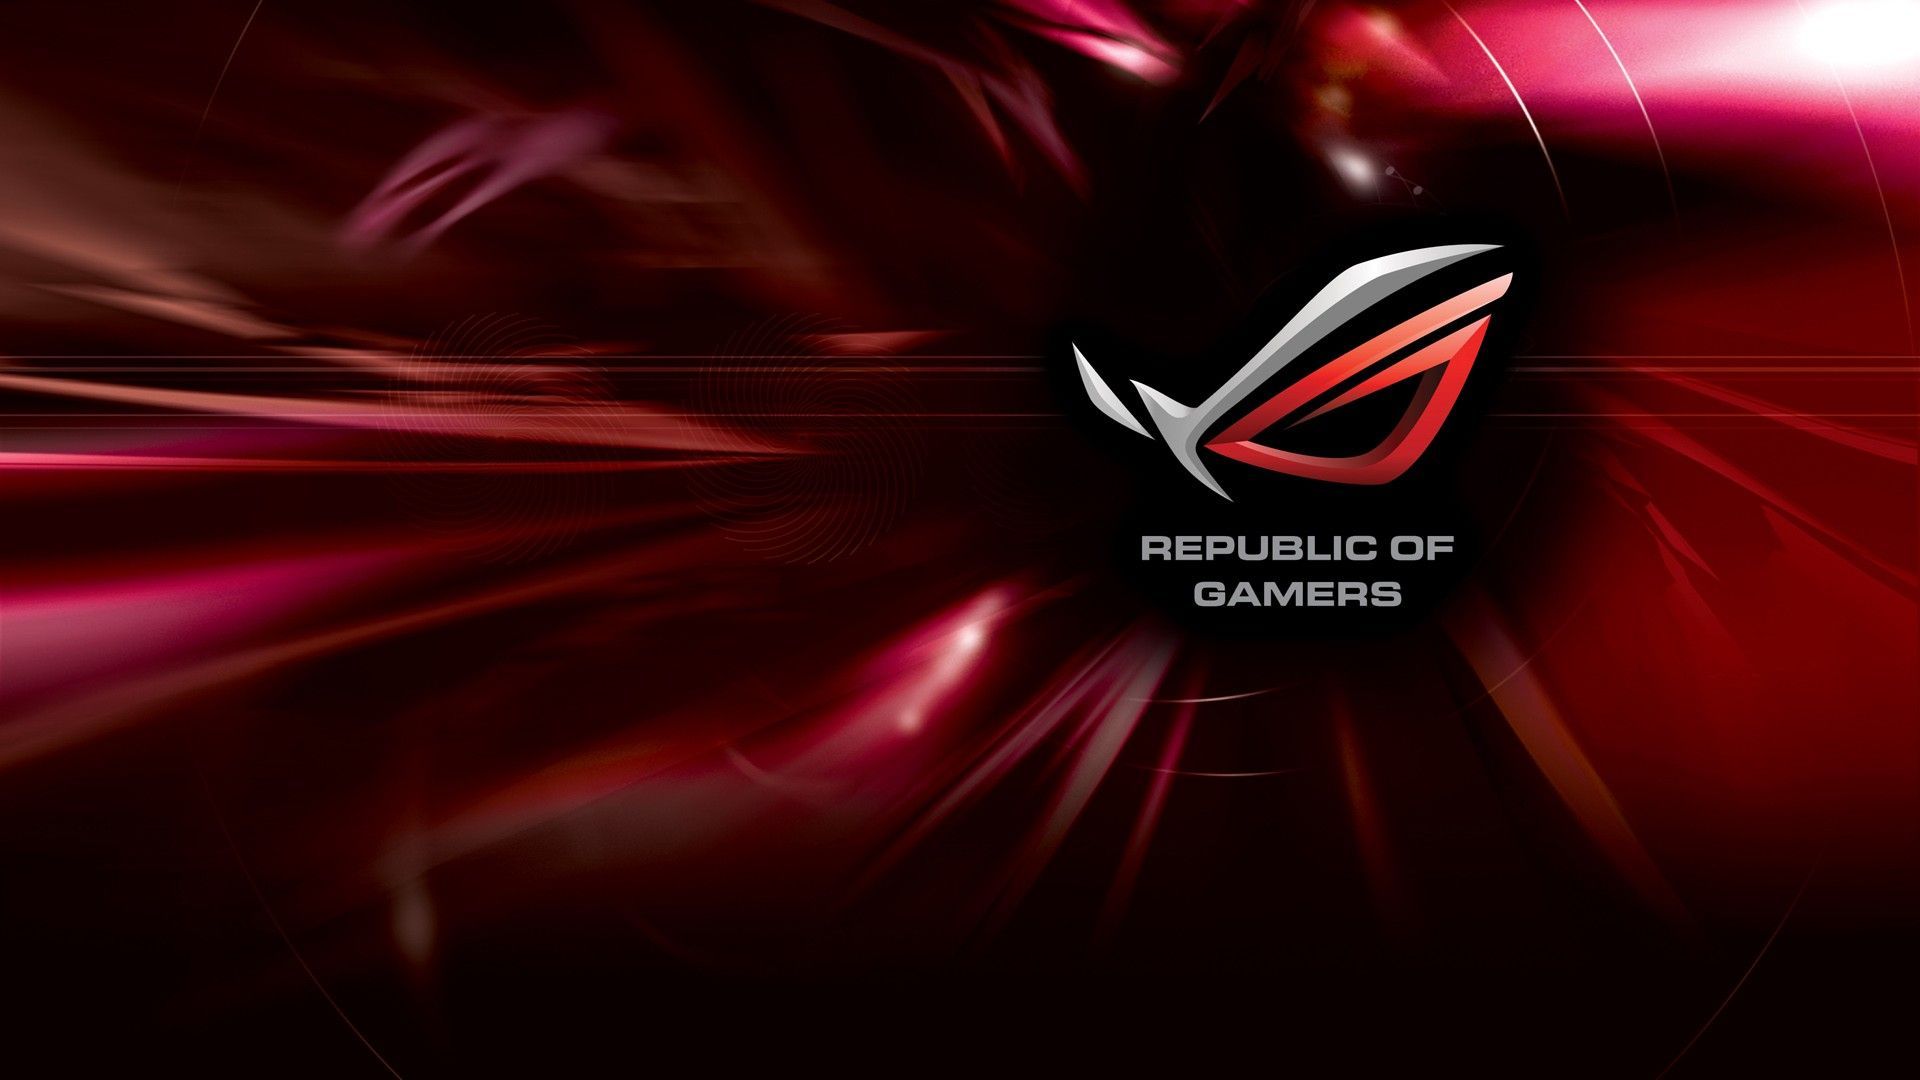 Check the best collection of HD Republic of Gamers Wallpaper for desktop, laptop, tablet and mobile device. Gaming wallpaper, Wallpaper pc, Pc desktop wallpaper